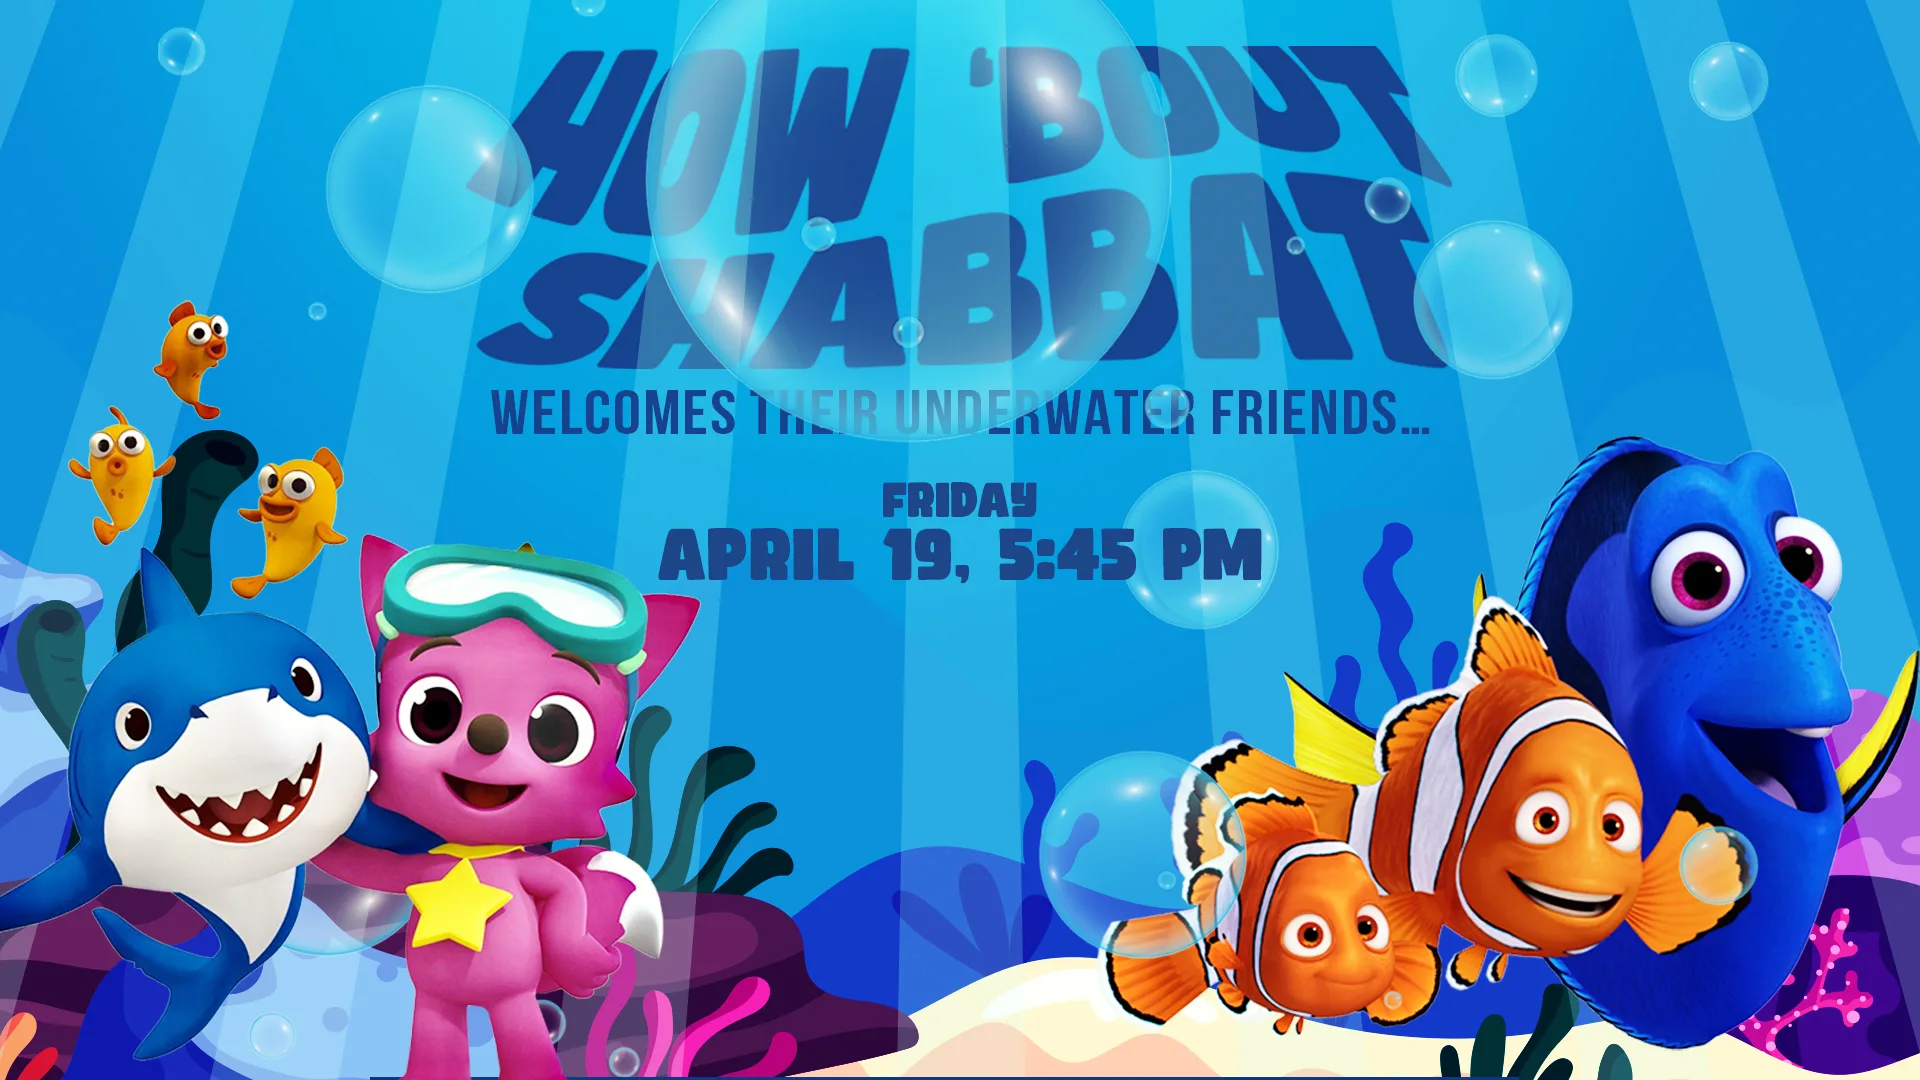 How 'Bout Shabbat Welcome Their Underwater Friends Web Banner